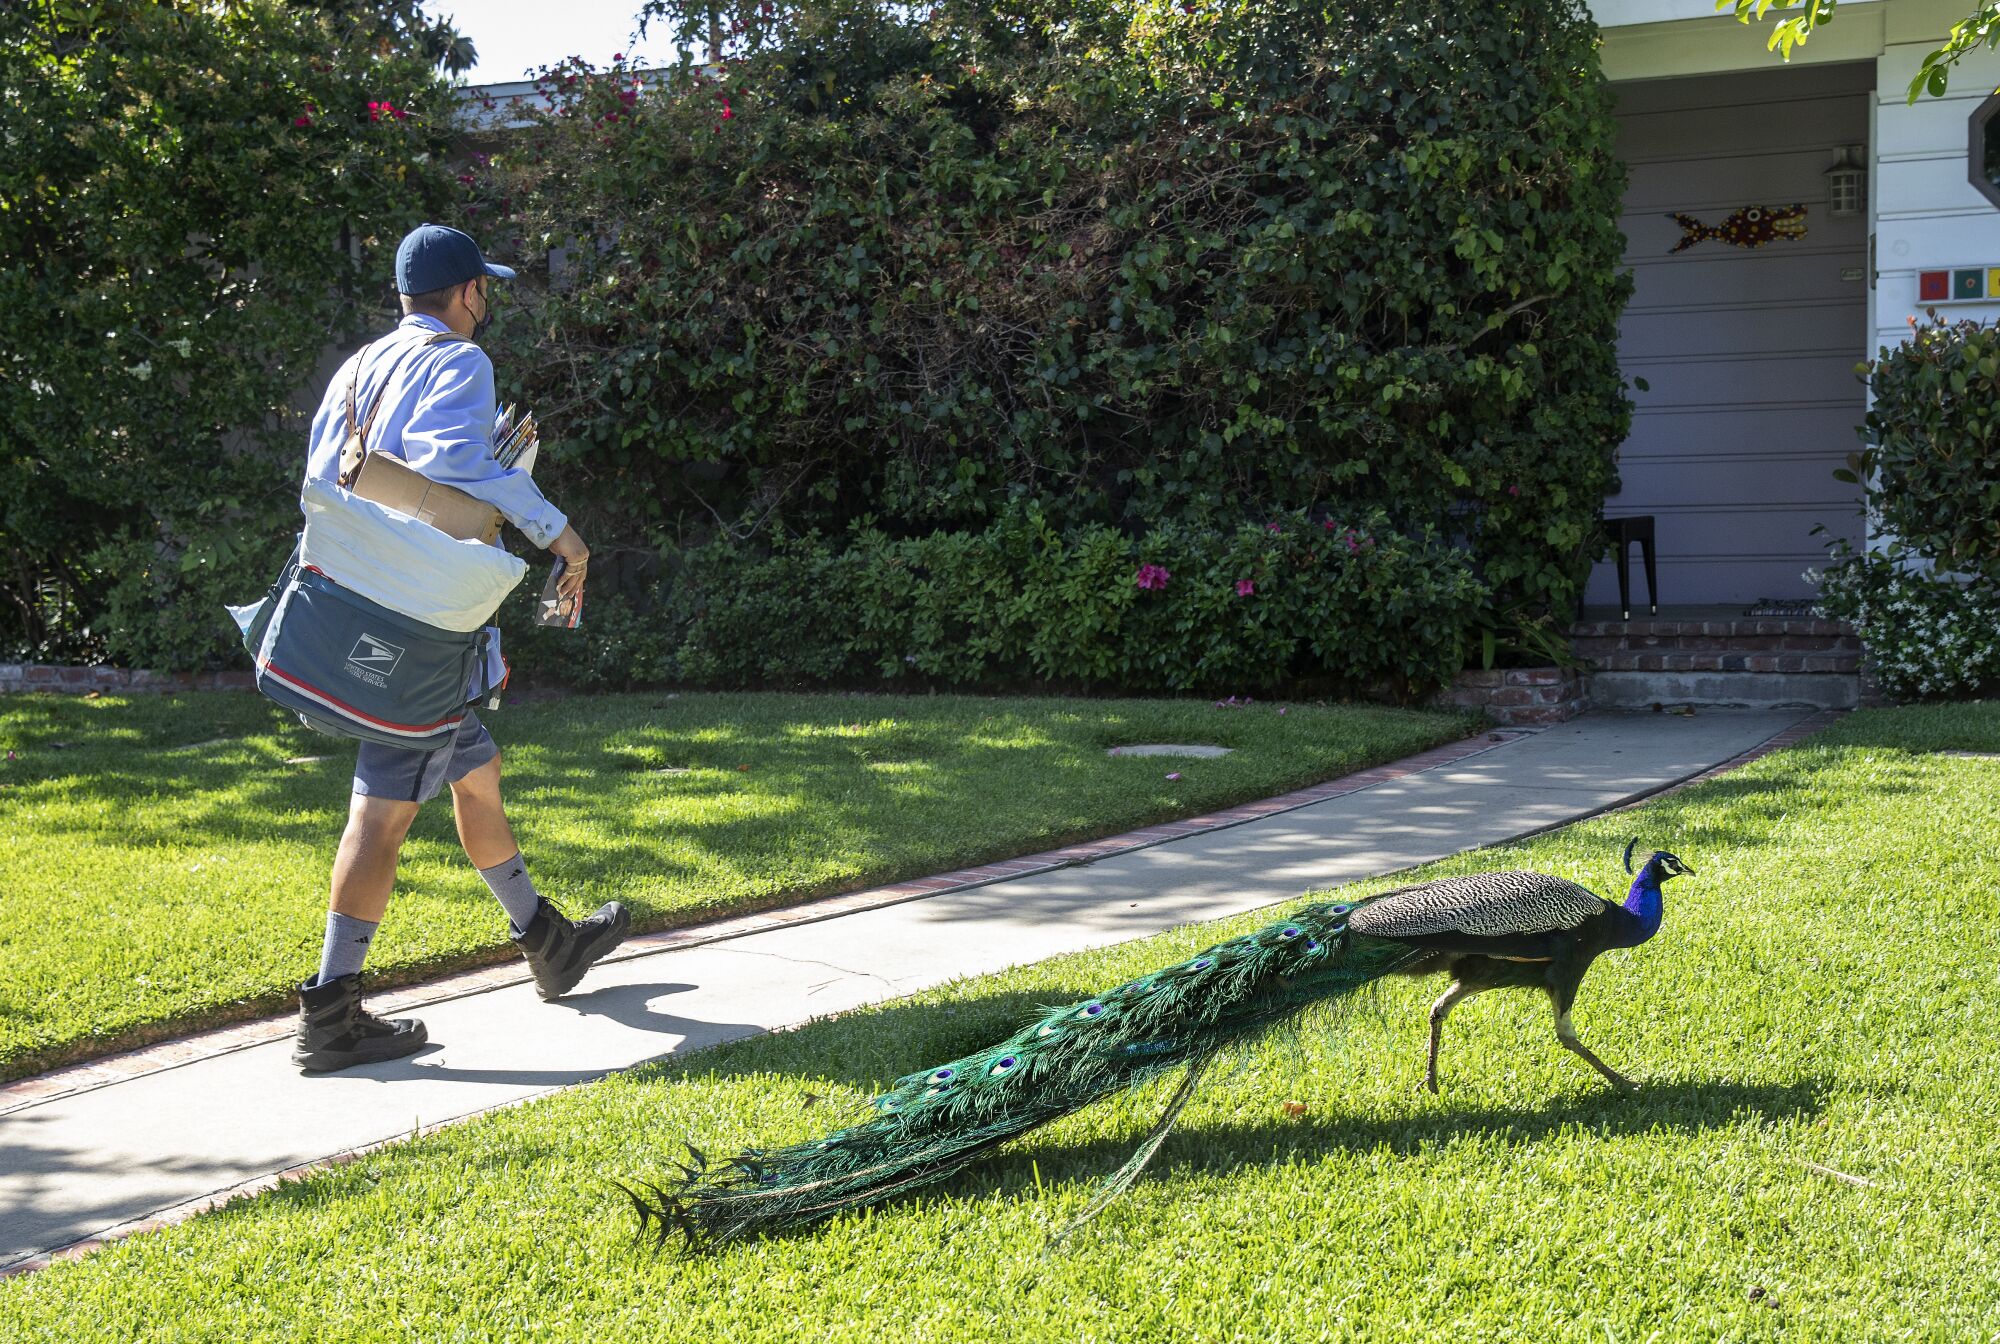 A male carrier walks to a front door of a home as a peacock struts in the bright green yard